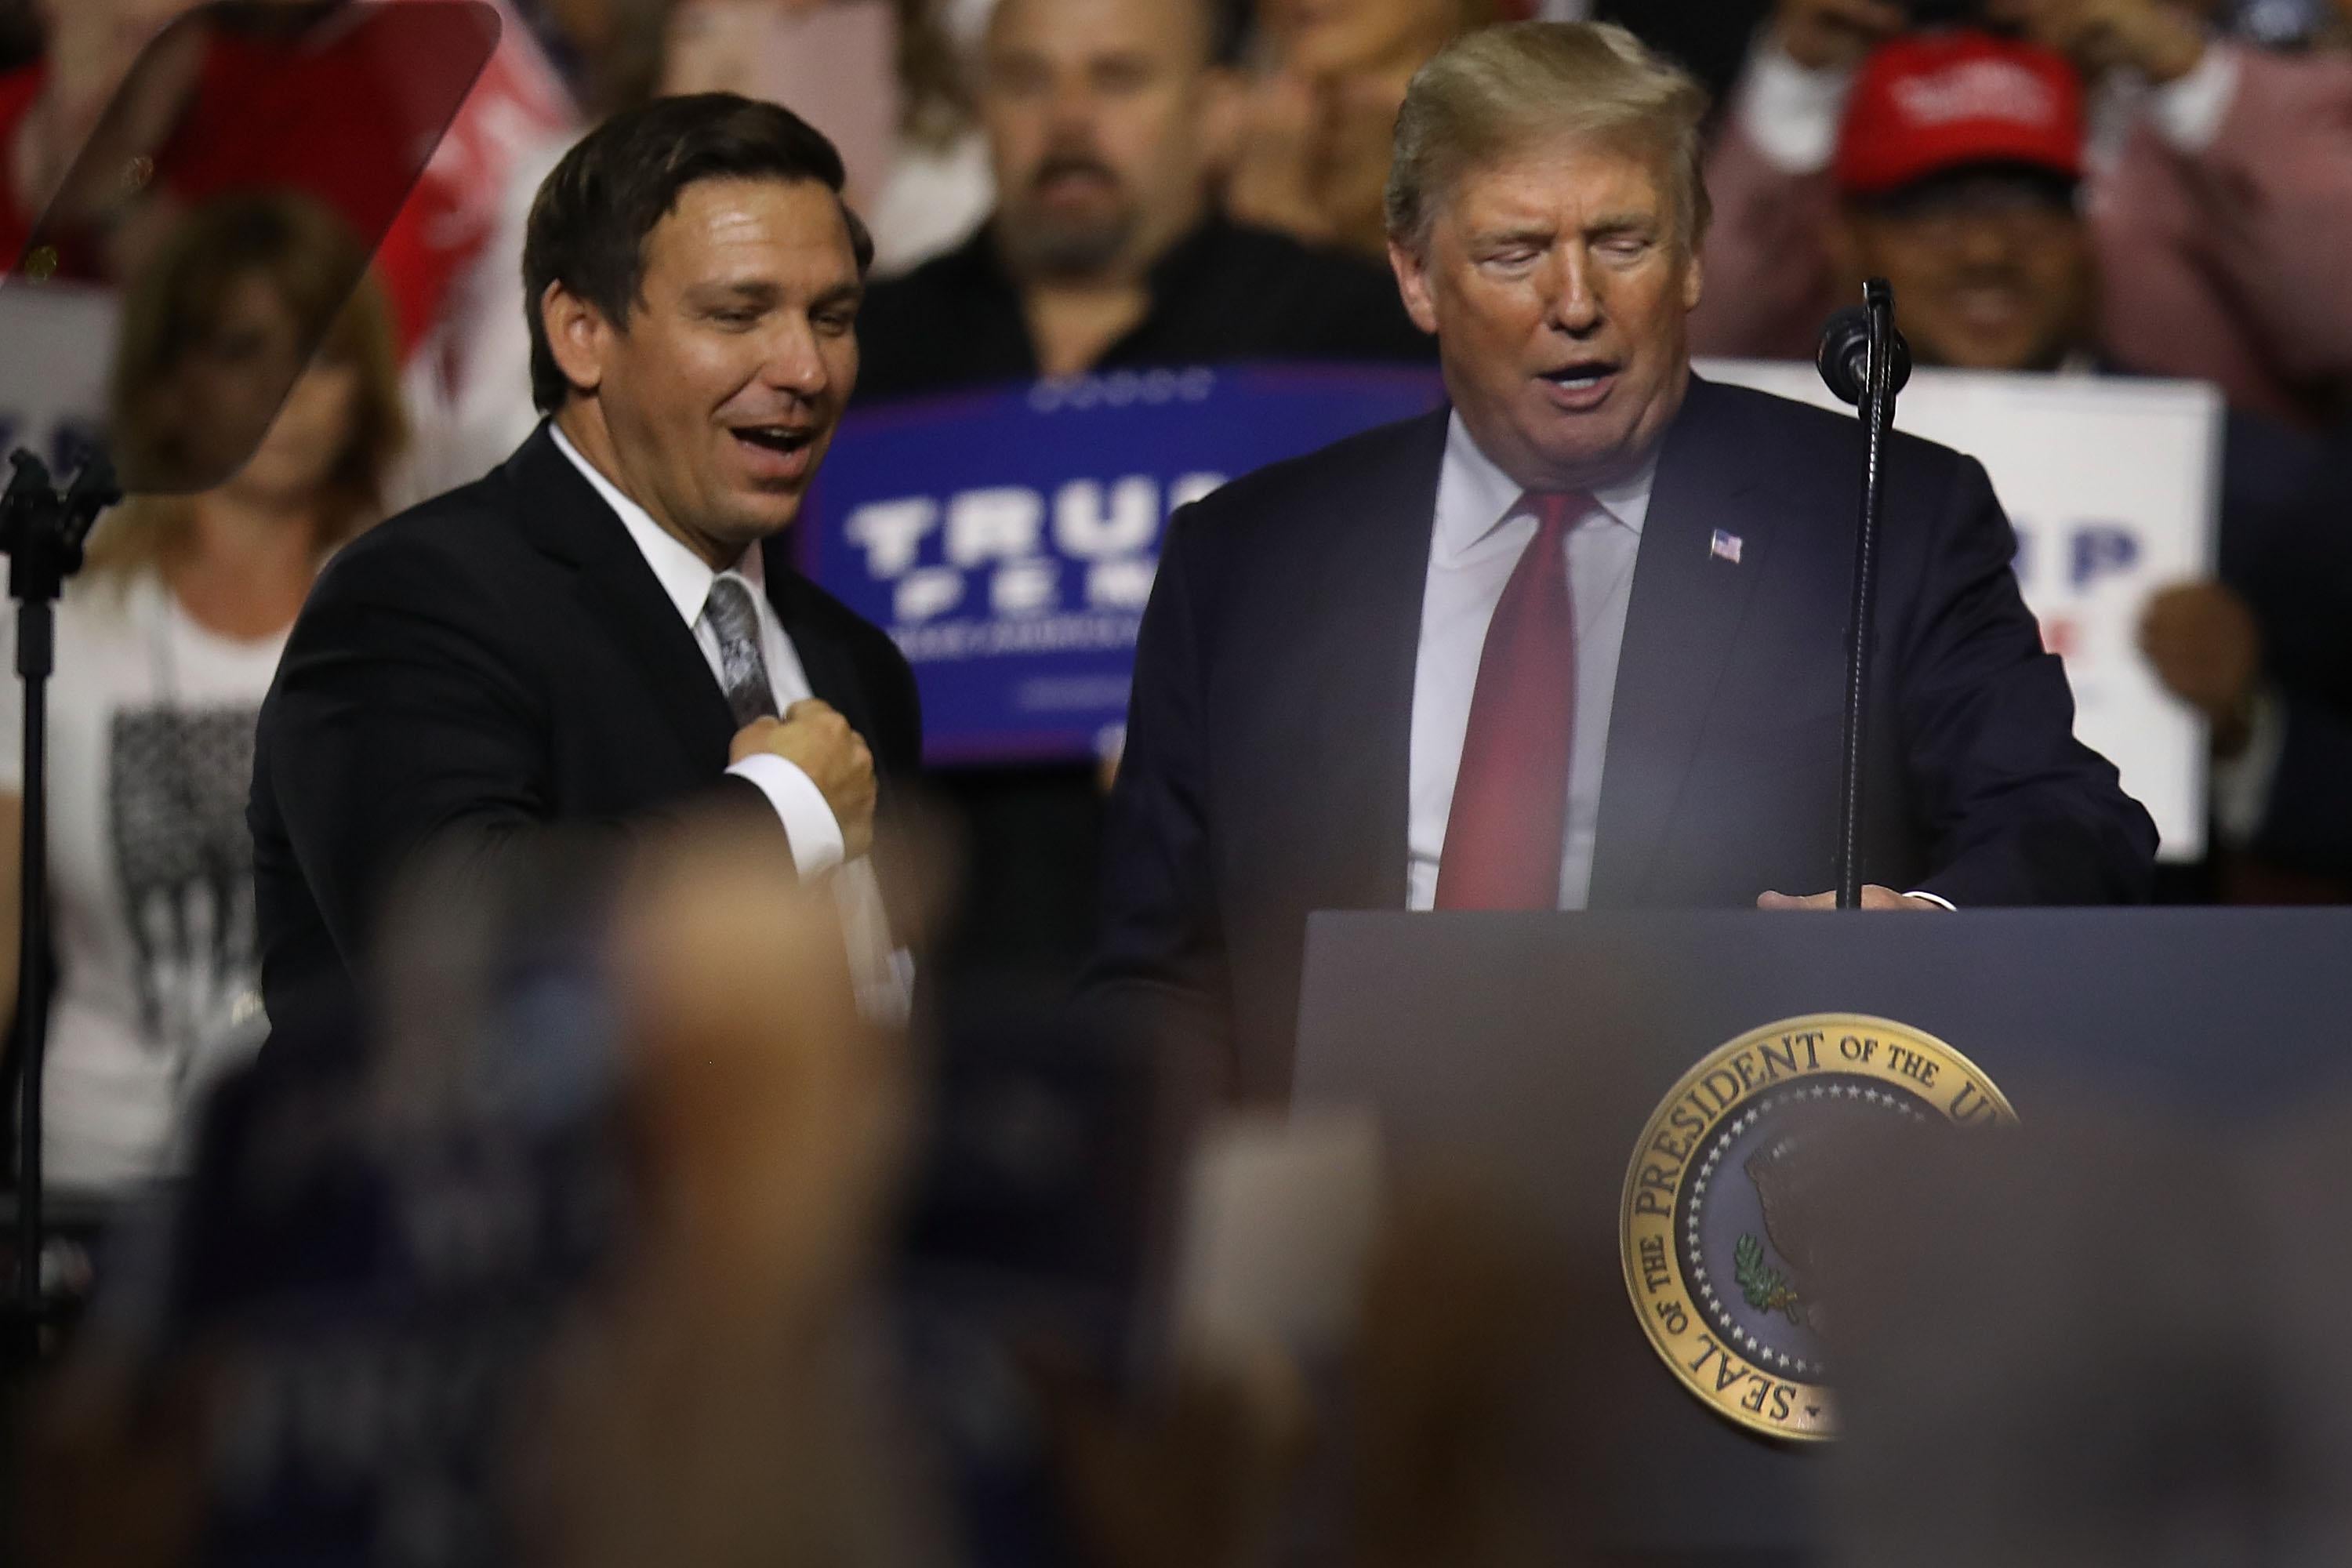 Donald Trump and Ron DeSantis on stage at a rally.